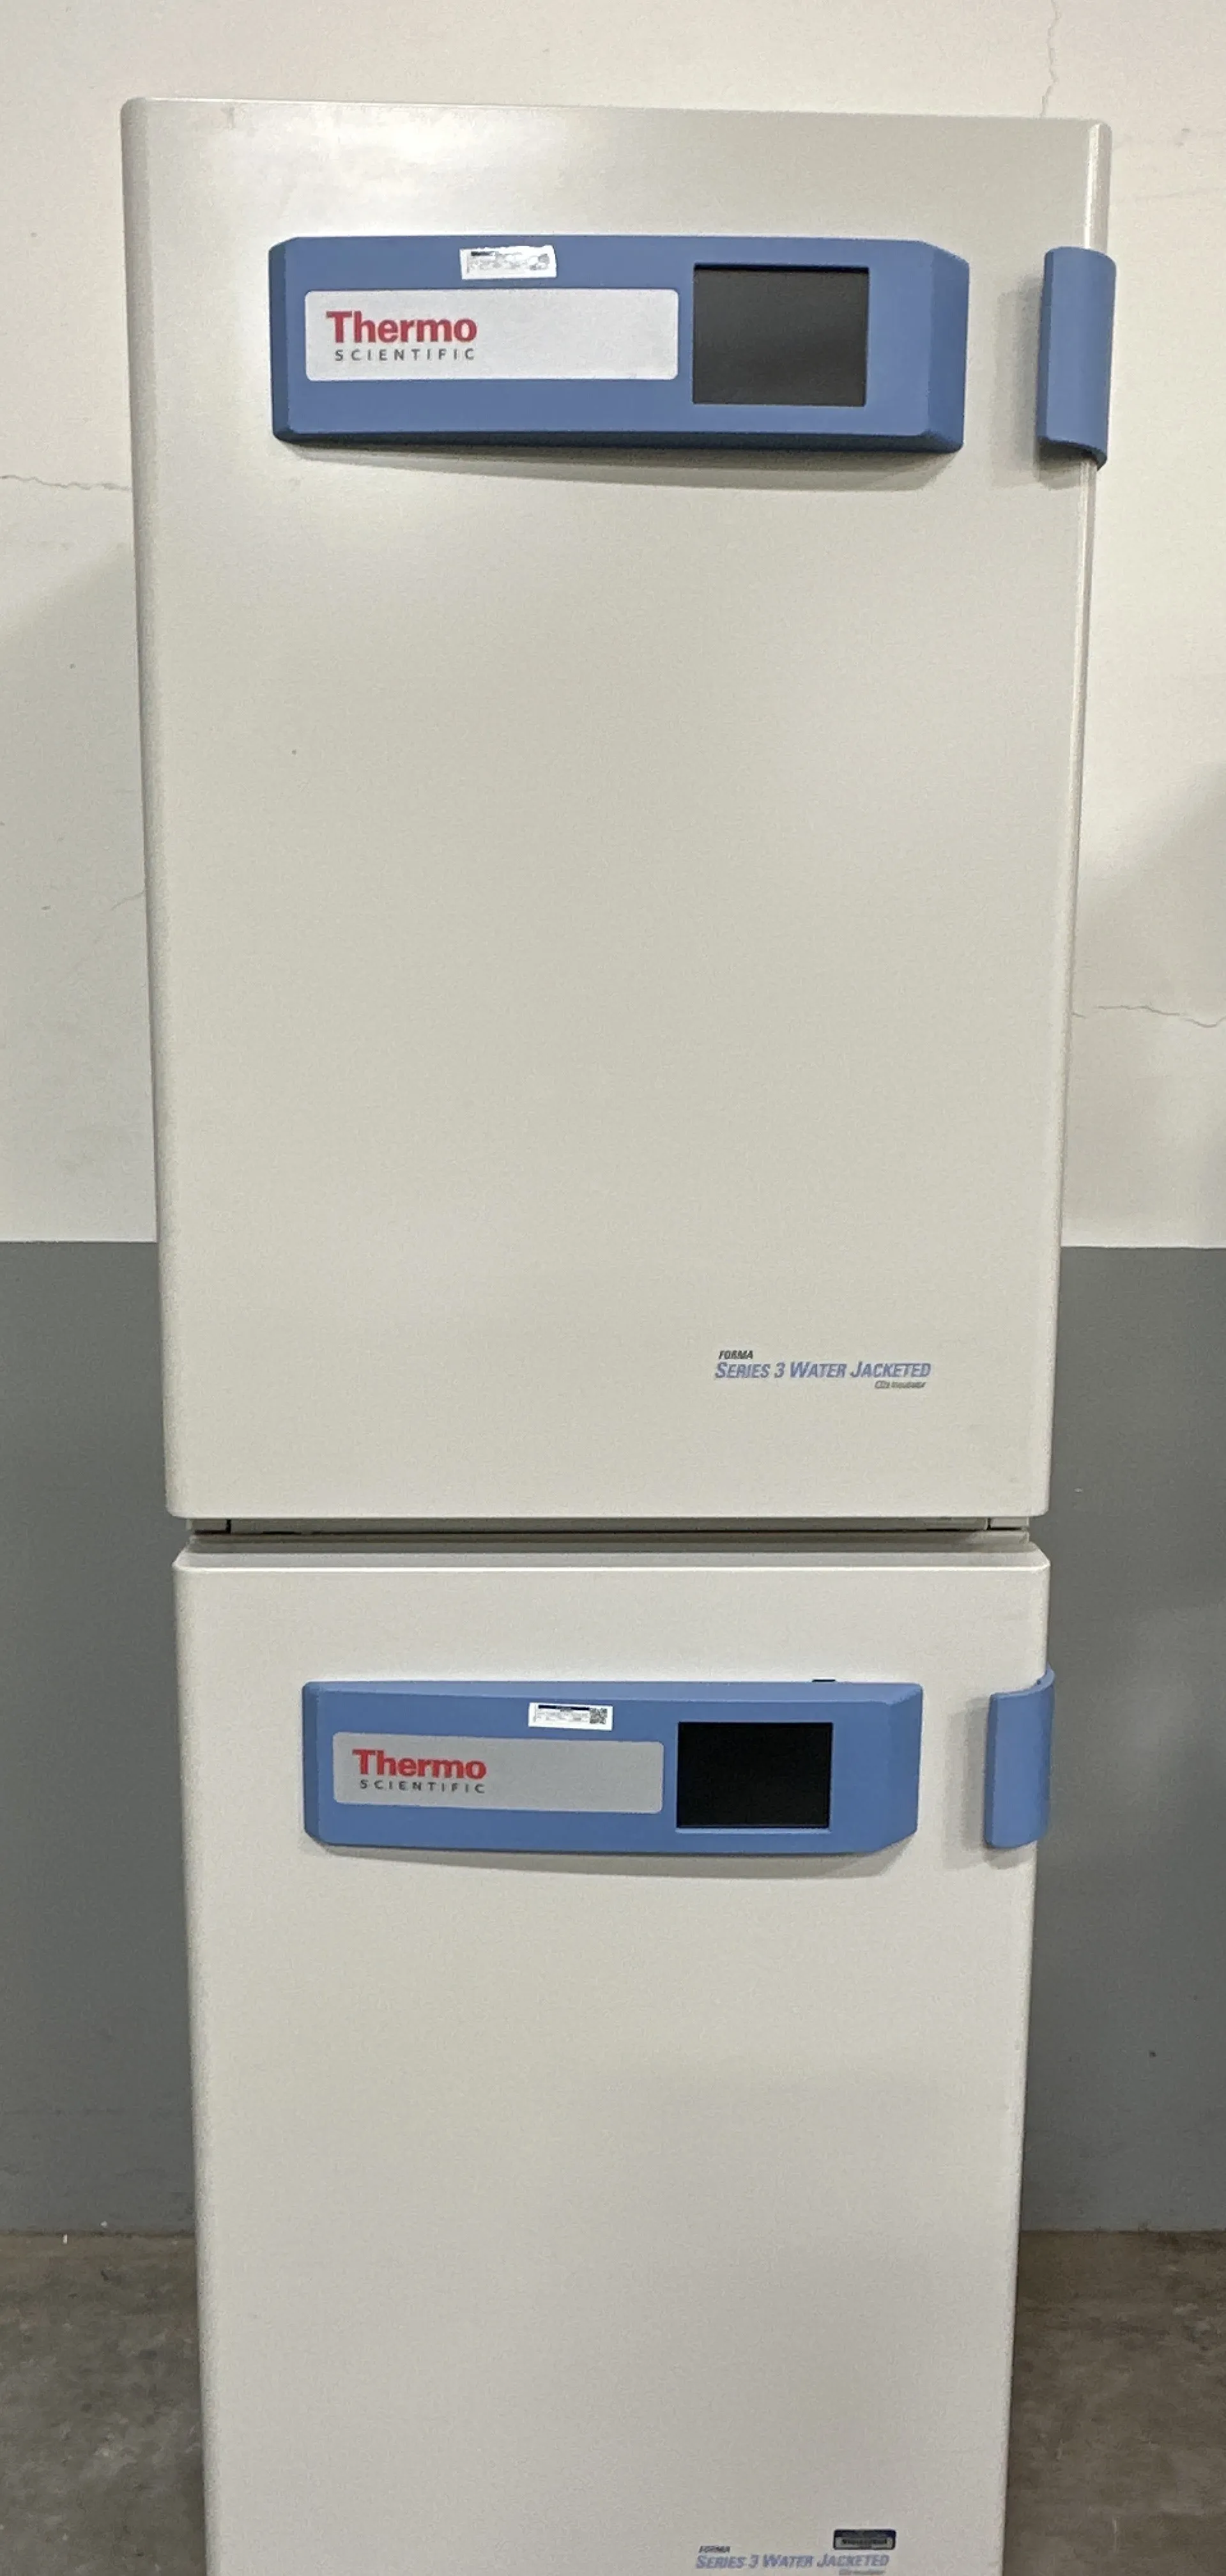 Thermo Scientific Forma Series 3 4120 Dual Stack Water Jacketed CO2 Incubator